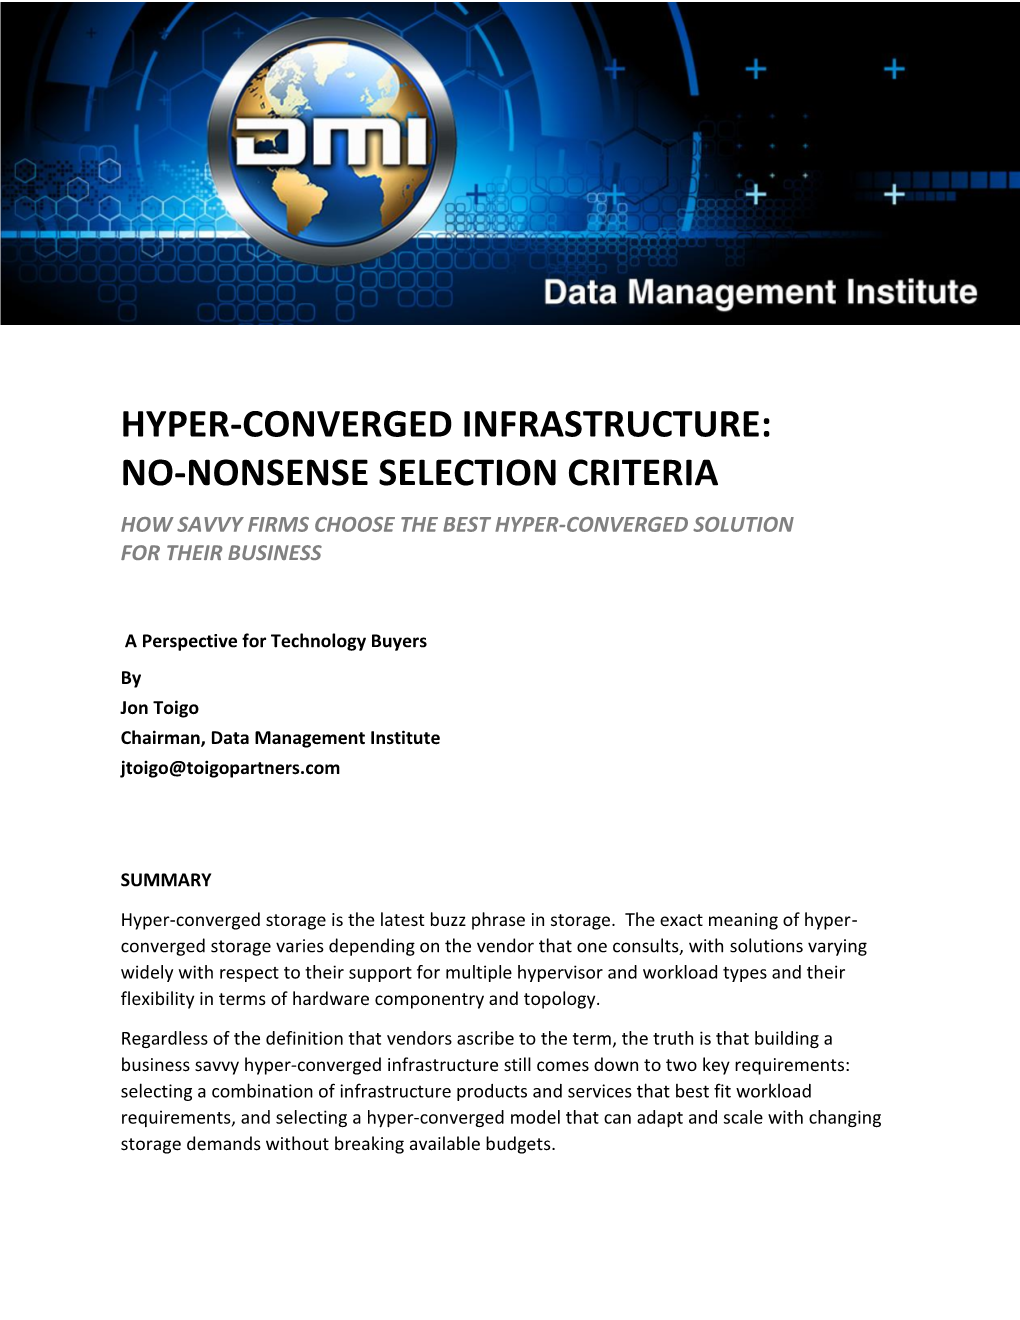 Hyper-Converged Infrastructure: No-Nonsense Selection Criteria How Savvy Firms Choose the Best Hyper-Converged Solution for Their Business